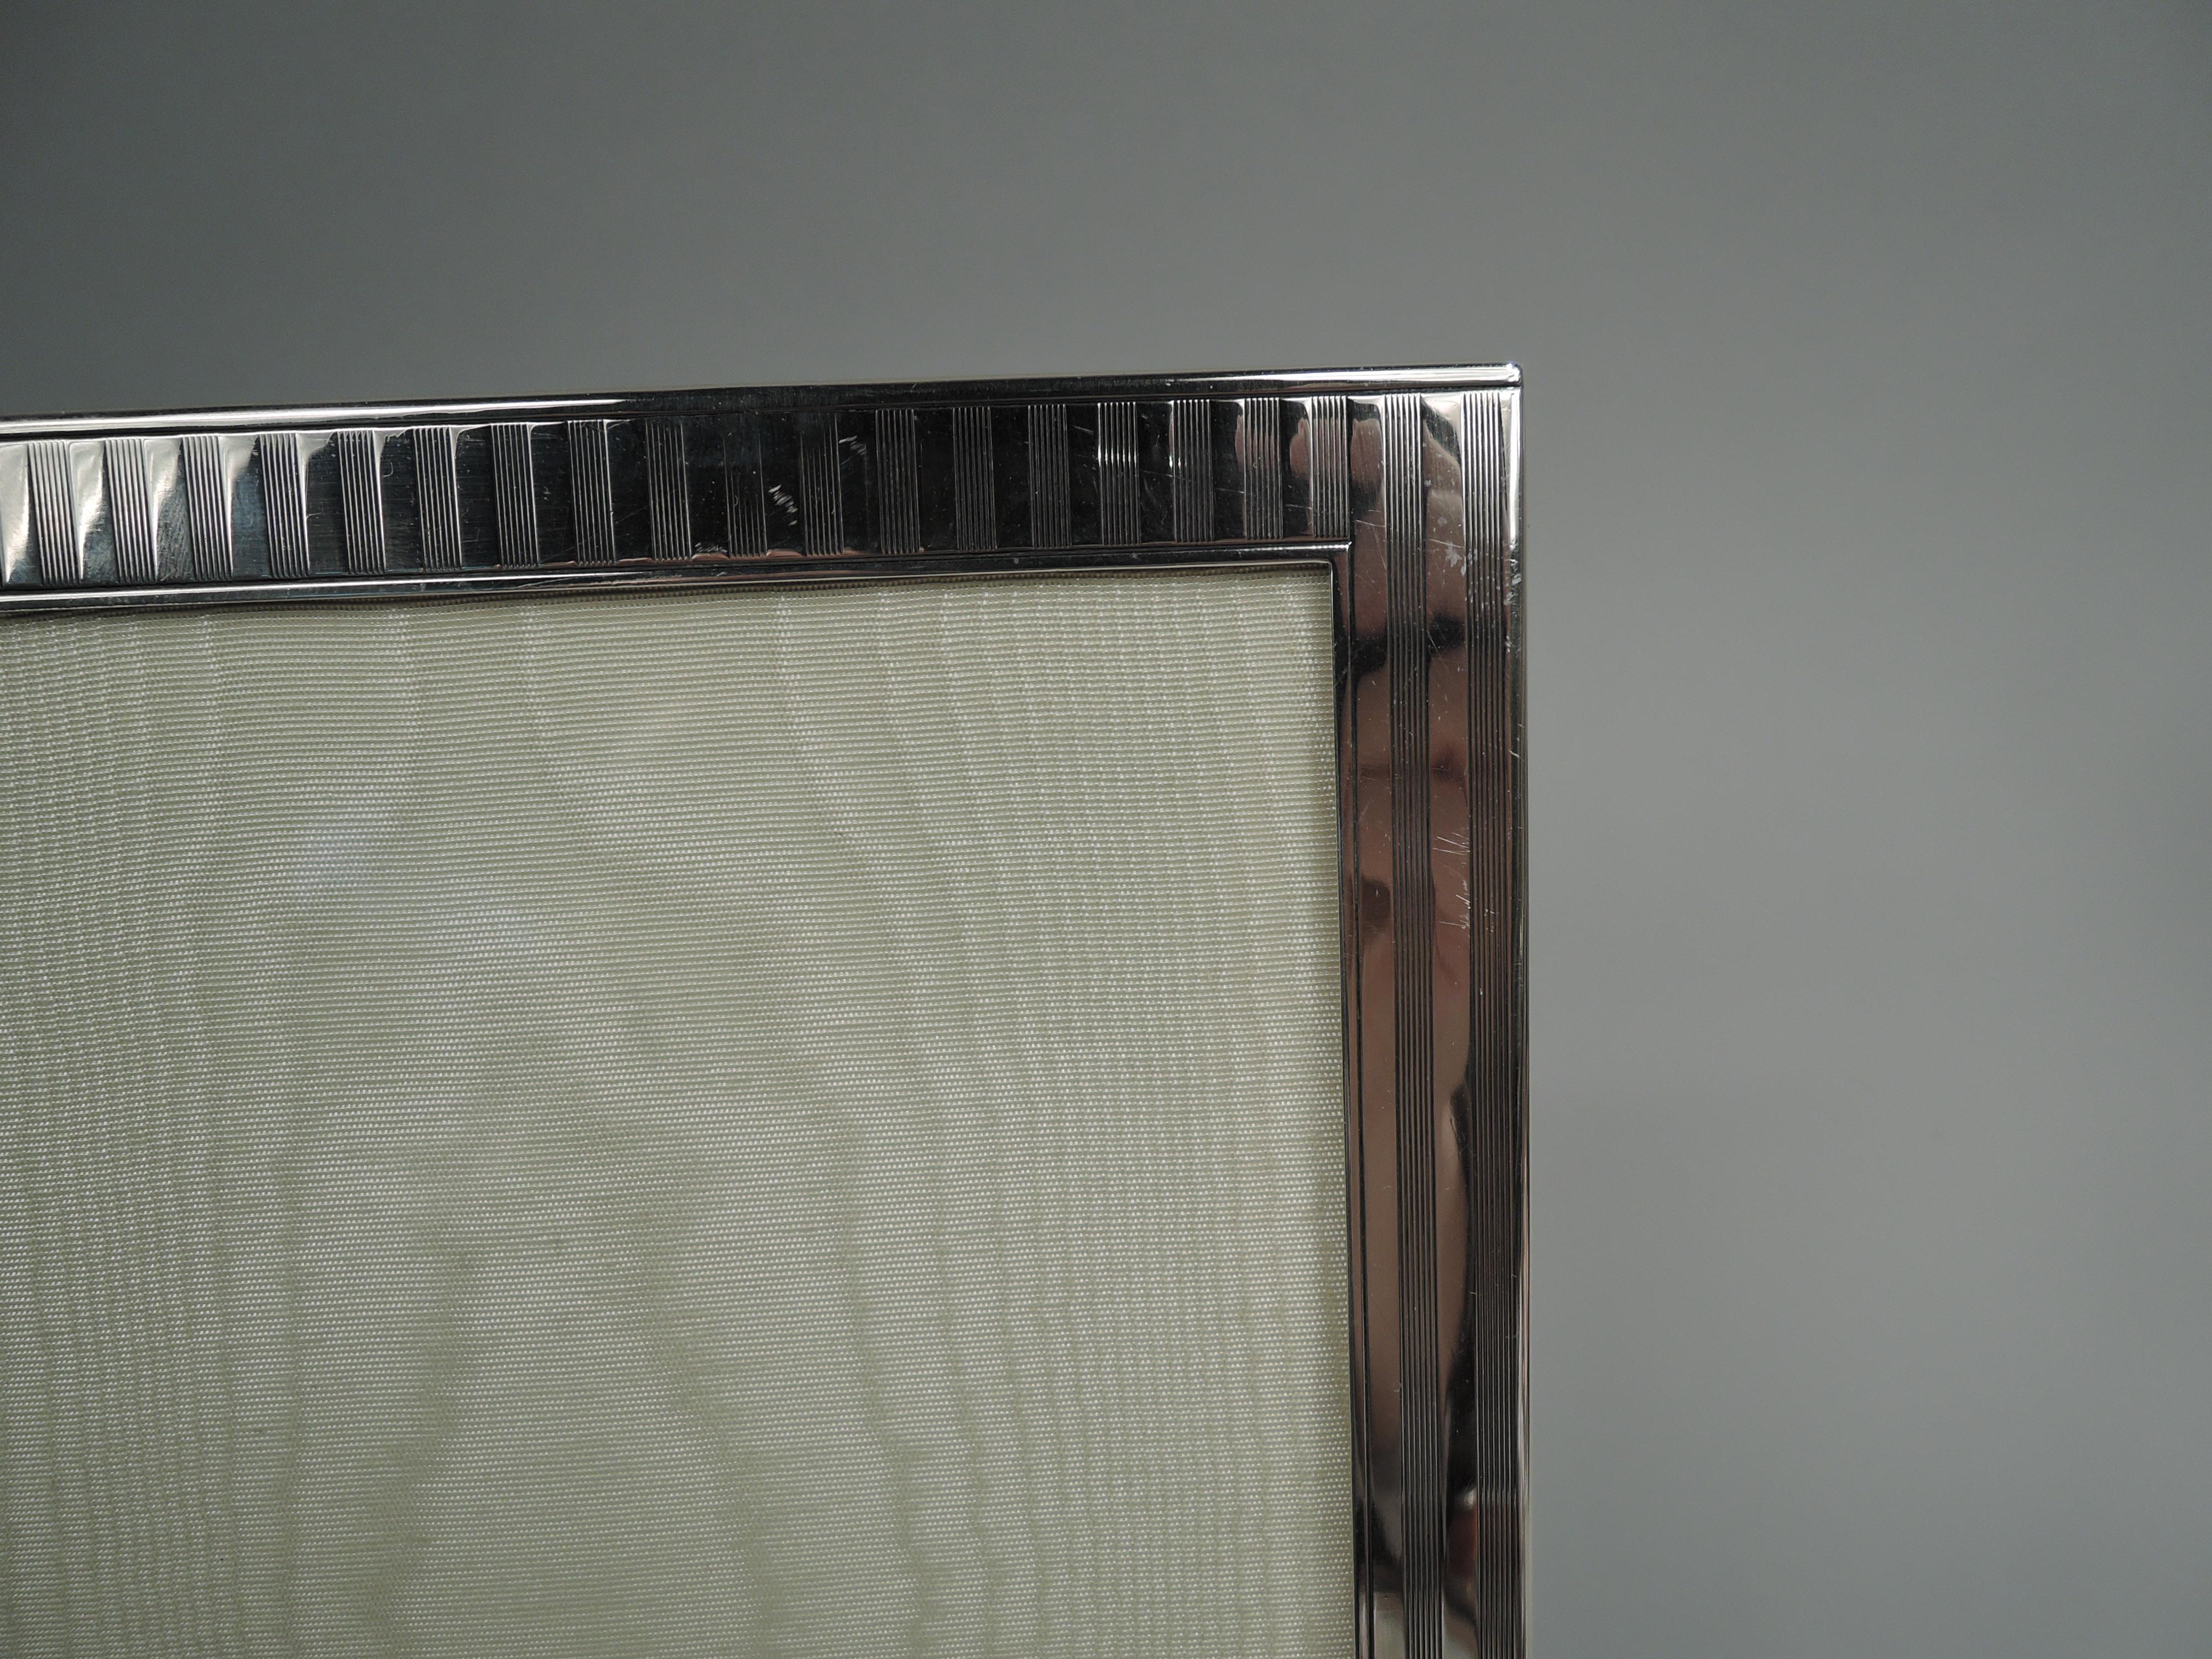 Art Deco sterling silver picture frame with classic linear ornament. Made by JF Fradley & Co. in New York, ca 1920. Rectangular window in same surround with vertical plain and engine-turned through stripes. Bottom rail larger with lozenge mono plate